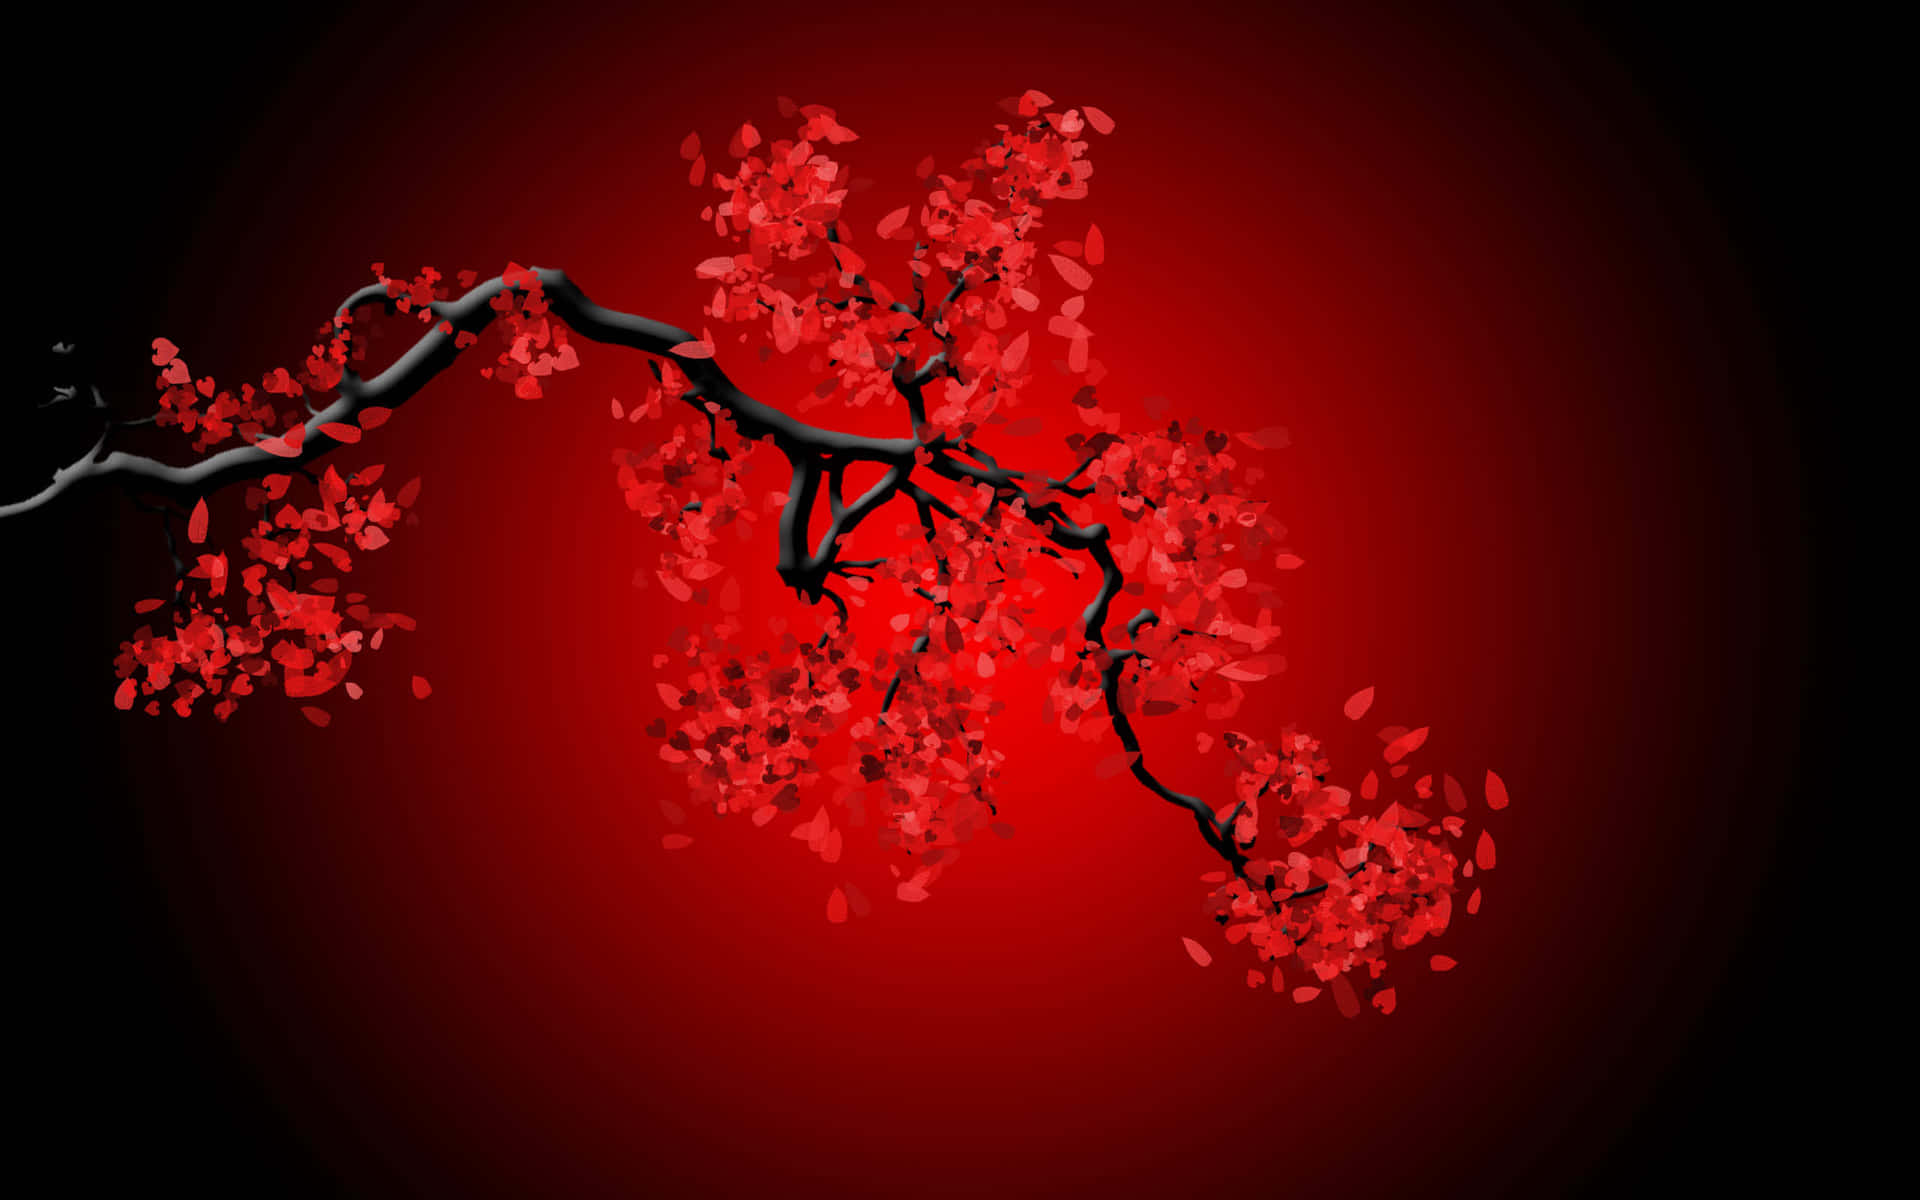 A Red Branch With Red Leaves On A Black Background